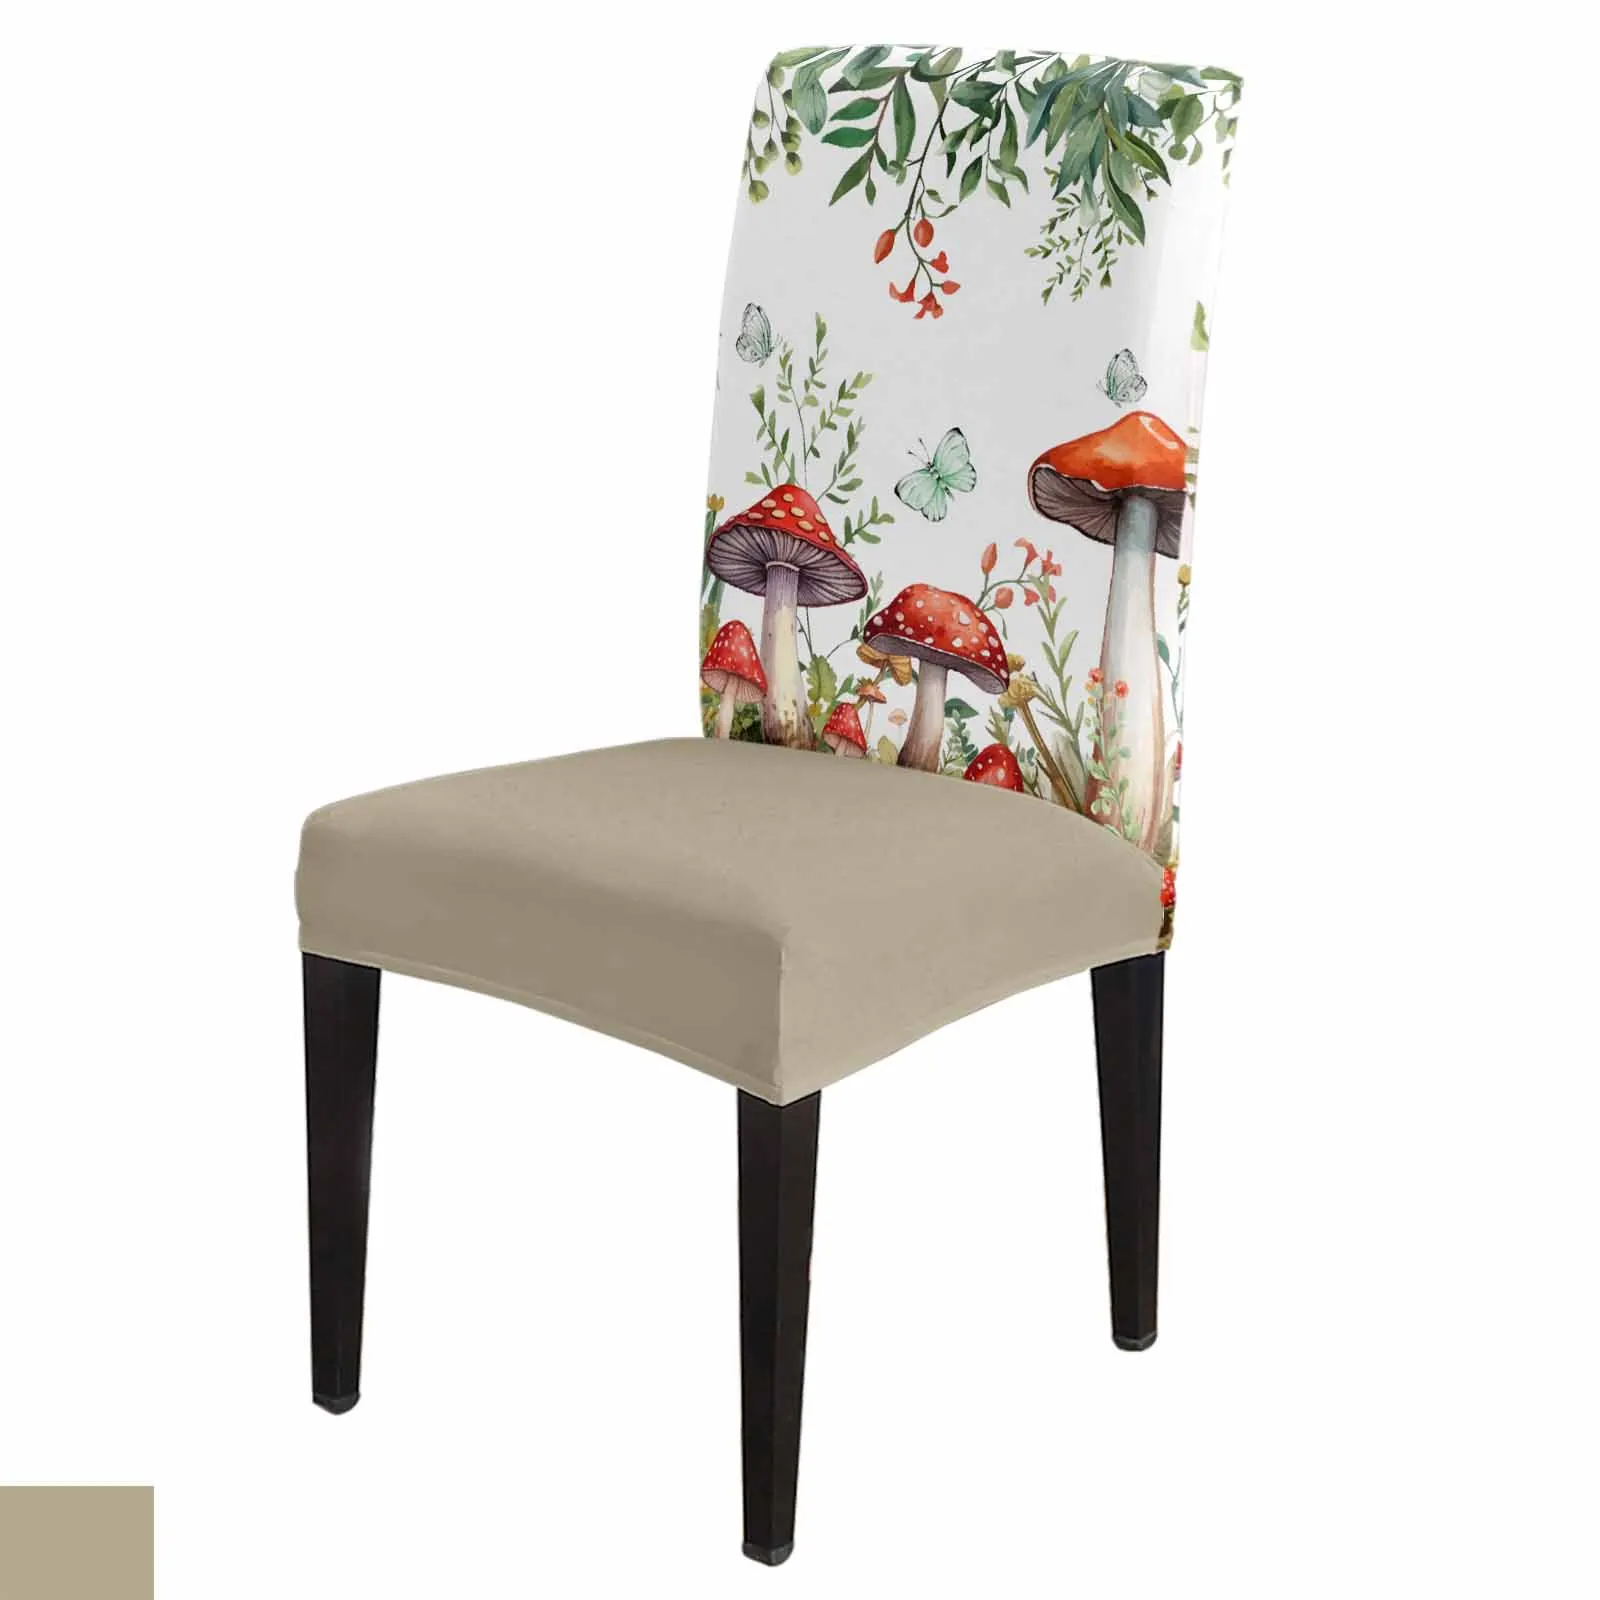 

Plant Mushroom Butterfly Watercolor Stretch Chair Cover for Dining Room Banquet Hotel Elastic Spandex Seat Chair Covers